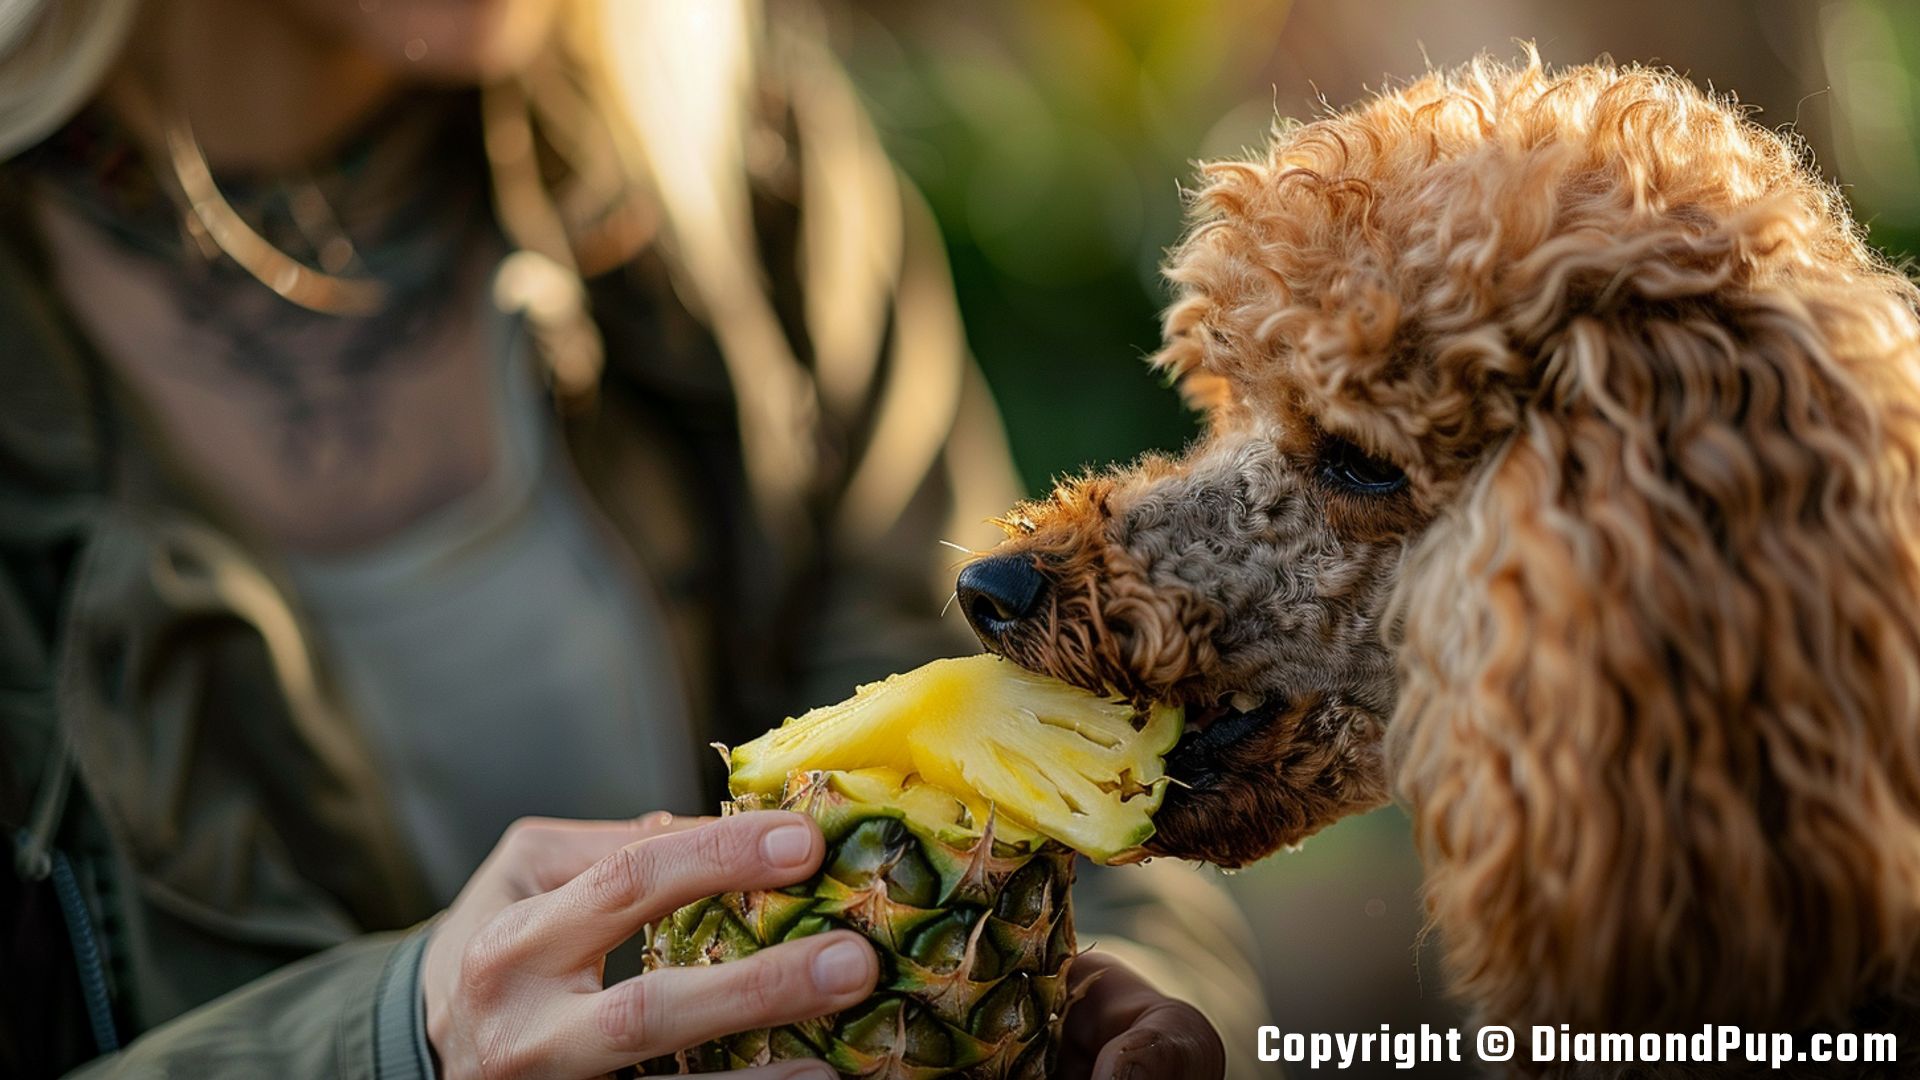 Image of a Cute Poodle Eating Pineapple